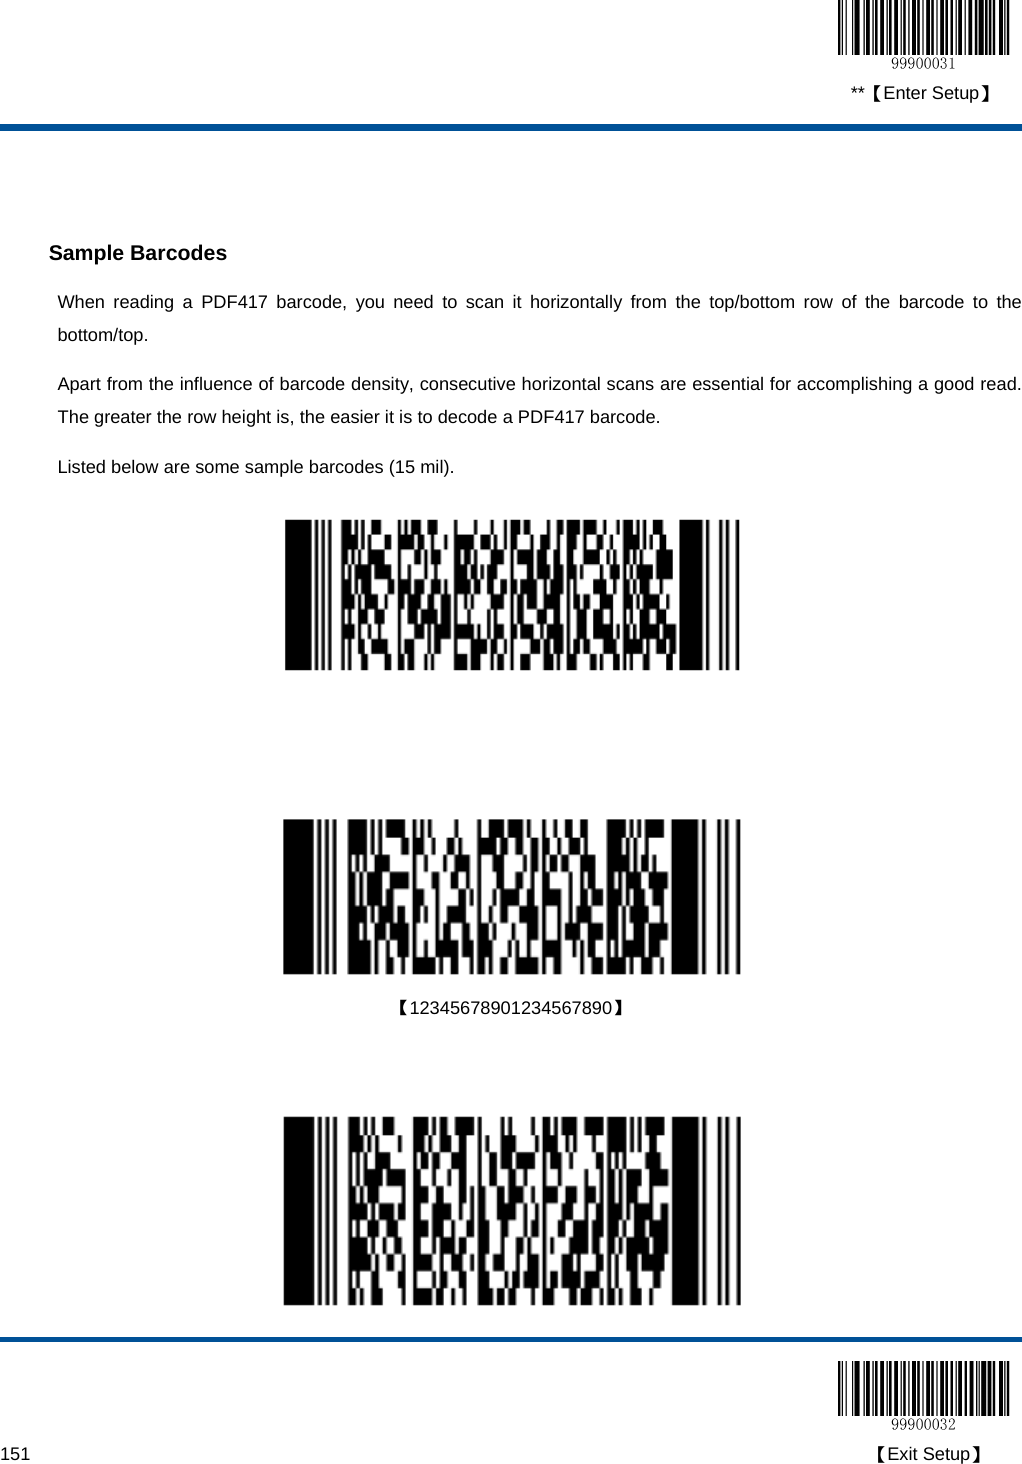  **【Enter Setup】  151                                                                                                                                                                                        【Exit Setup】   Sample Barcodes When reading a PDF417 barcode, you need to scan it horizontally from the top/bottom row of the barcode to the bottom/top.    Apart from the influence of barcode density, consecutive horizontal scans are essential for accomplishing a good read.  The greater the row height is, the easier it is to decode a PDF417 barcode. Listed below are some sample barcodes (15 mil).        【12345678901234567890】     